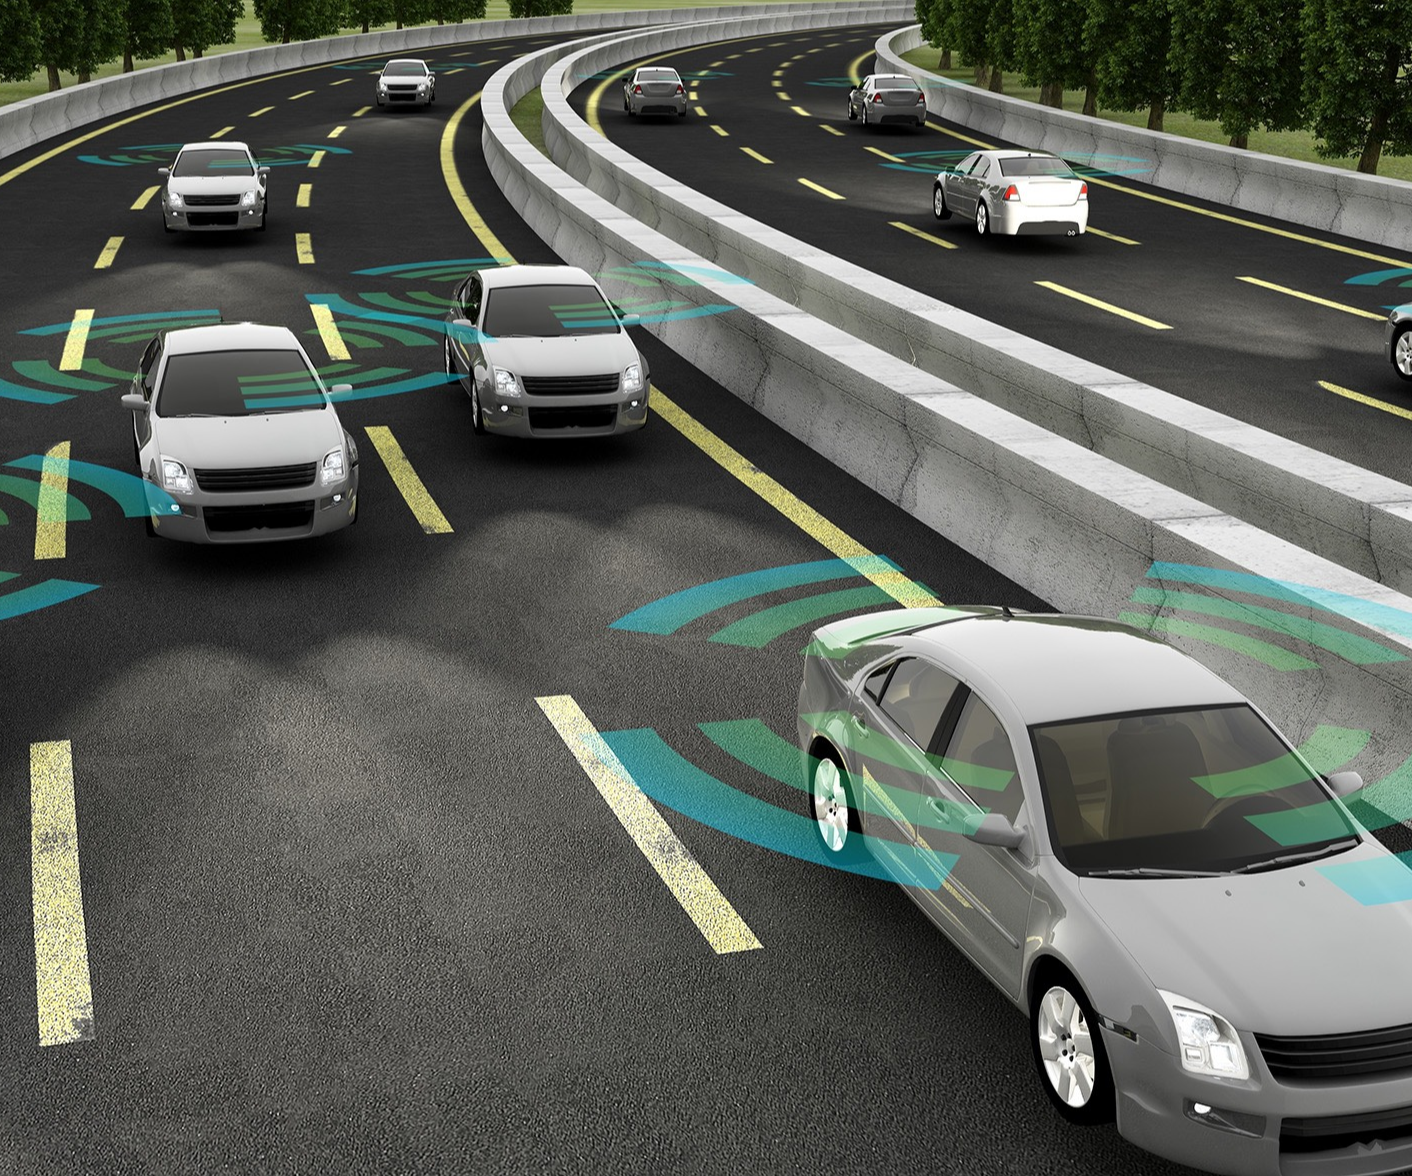 U‑M and TRI Researchers Develop Control Software to Ensure Autonomous Vehicles Stay in Lane